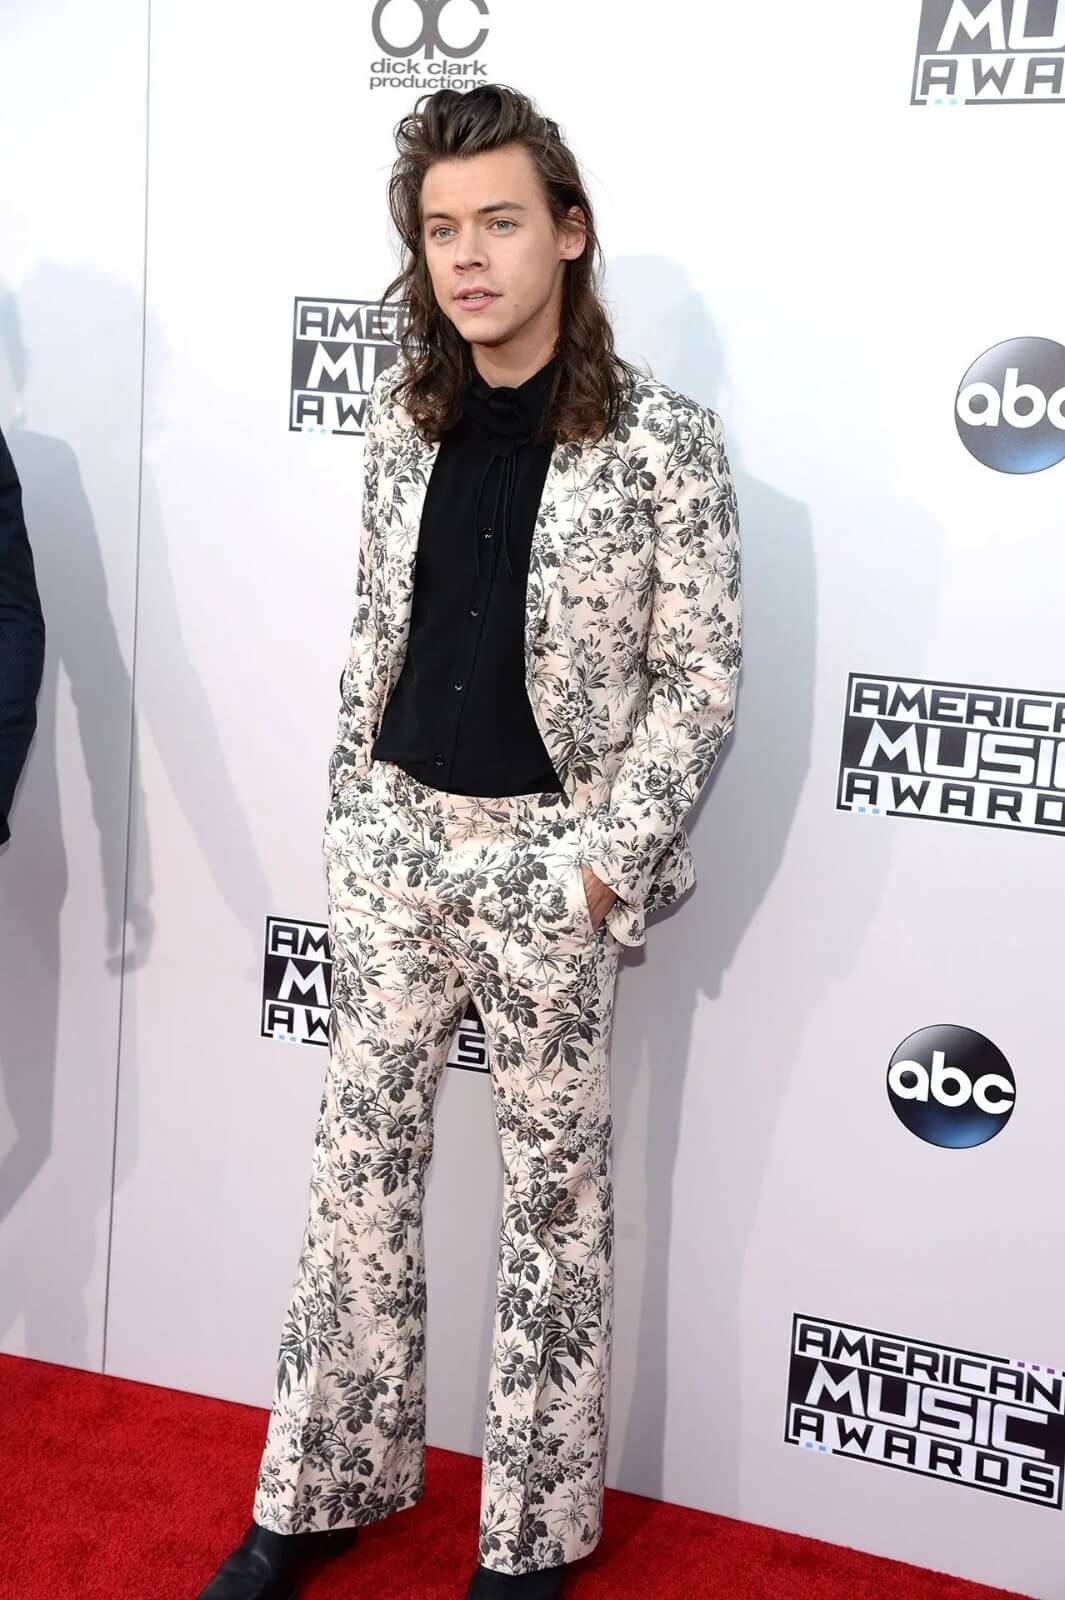 Take a look at the funkiest outfits worn by the English singer Harry Styles 769817